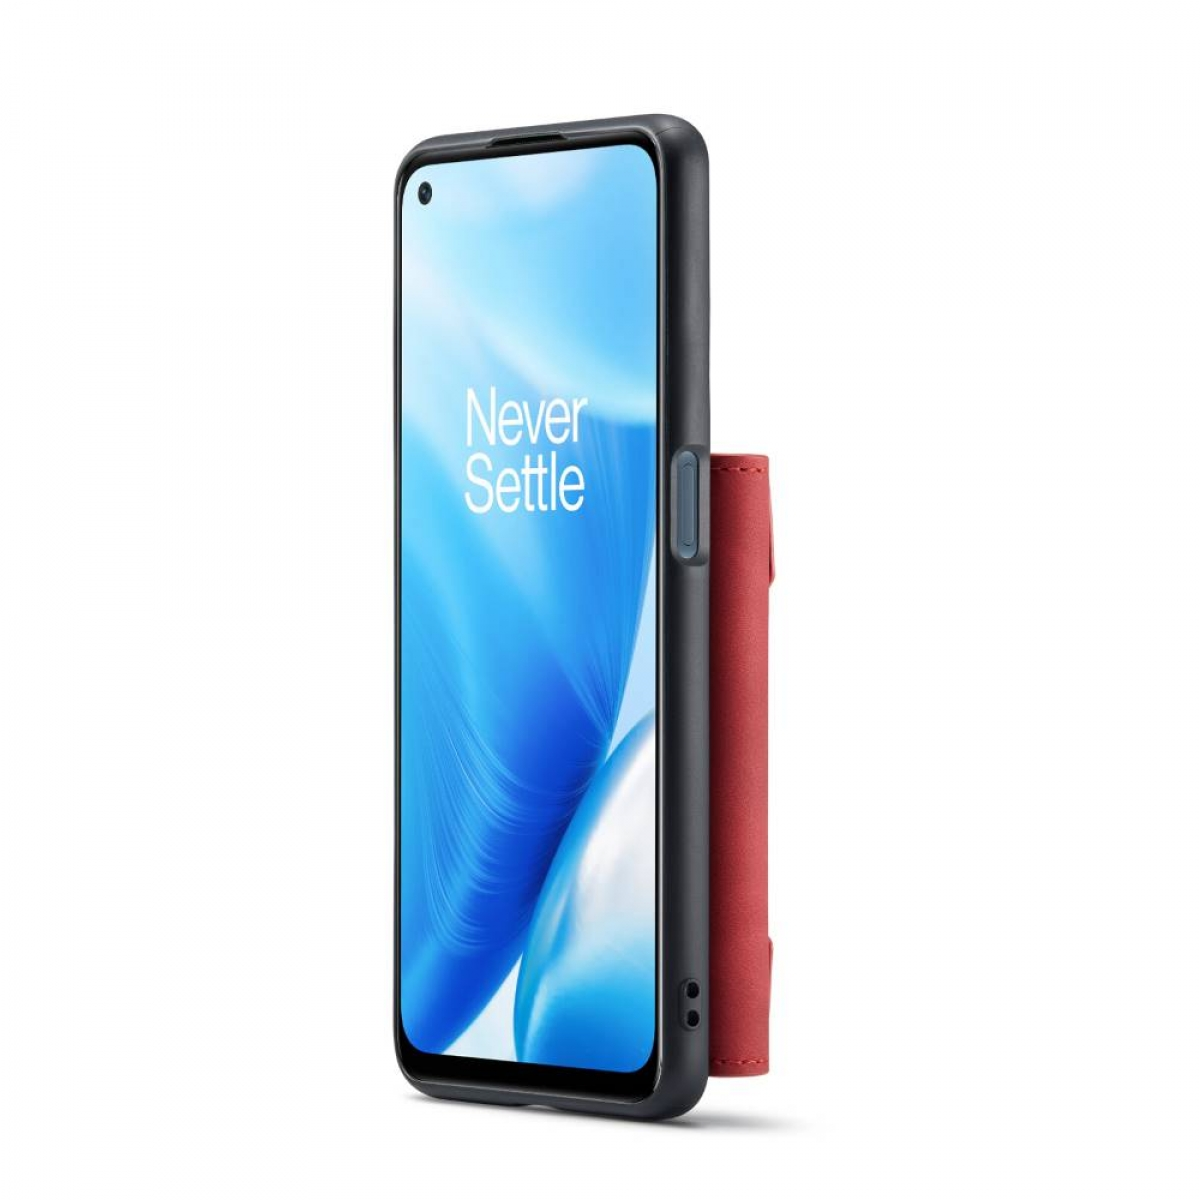 DG MING M2 2in1, Backcover, N200 Rot 5G, Nord OnePlus